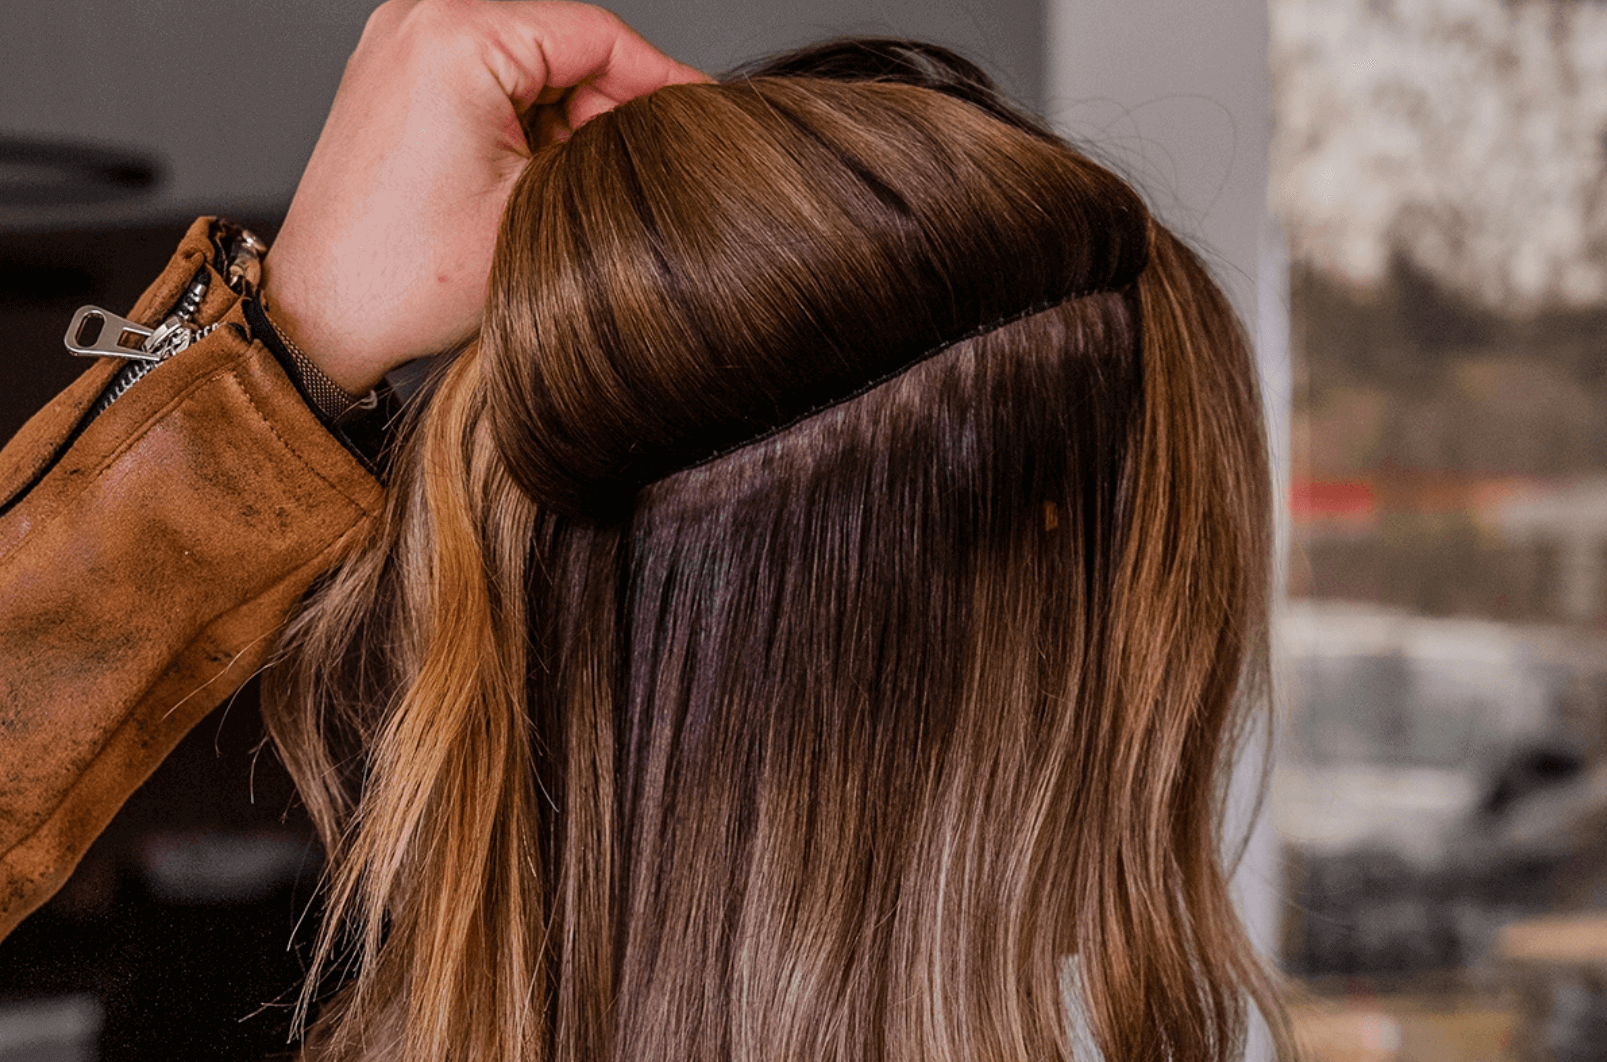 Hand Tied Hair Extensions: Pros and Cons